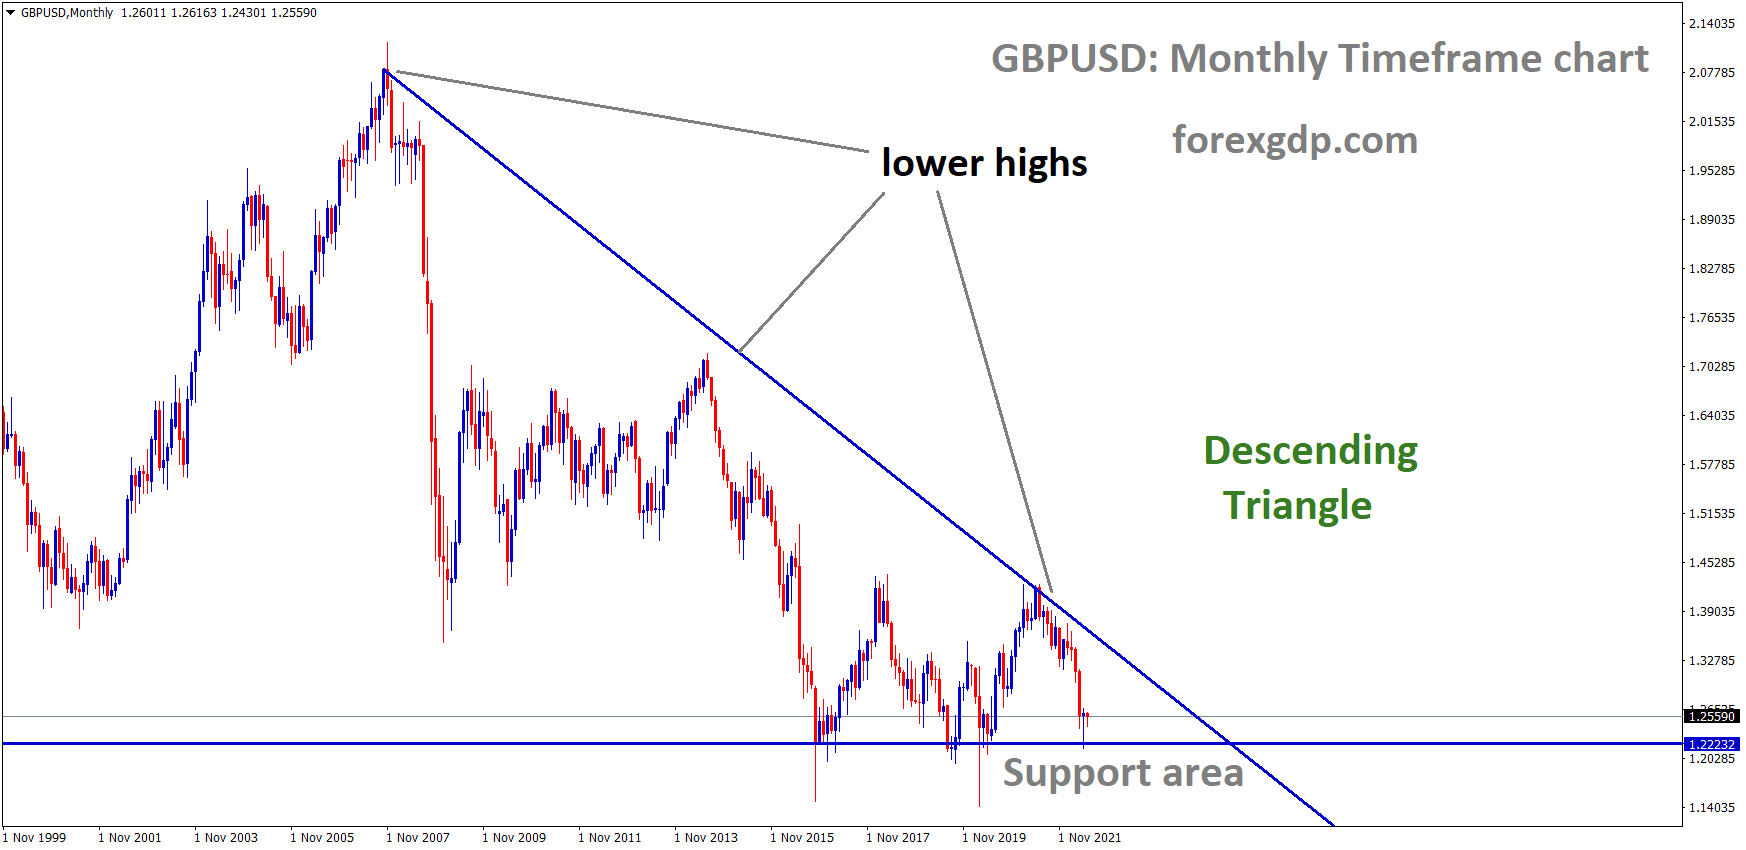 GBPUSD Monthly Time Frame Analysis Market is moving in the Descending triangle pattern and the Market has rebounded from the horizontal Support area of the pattern